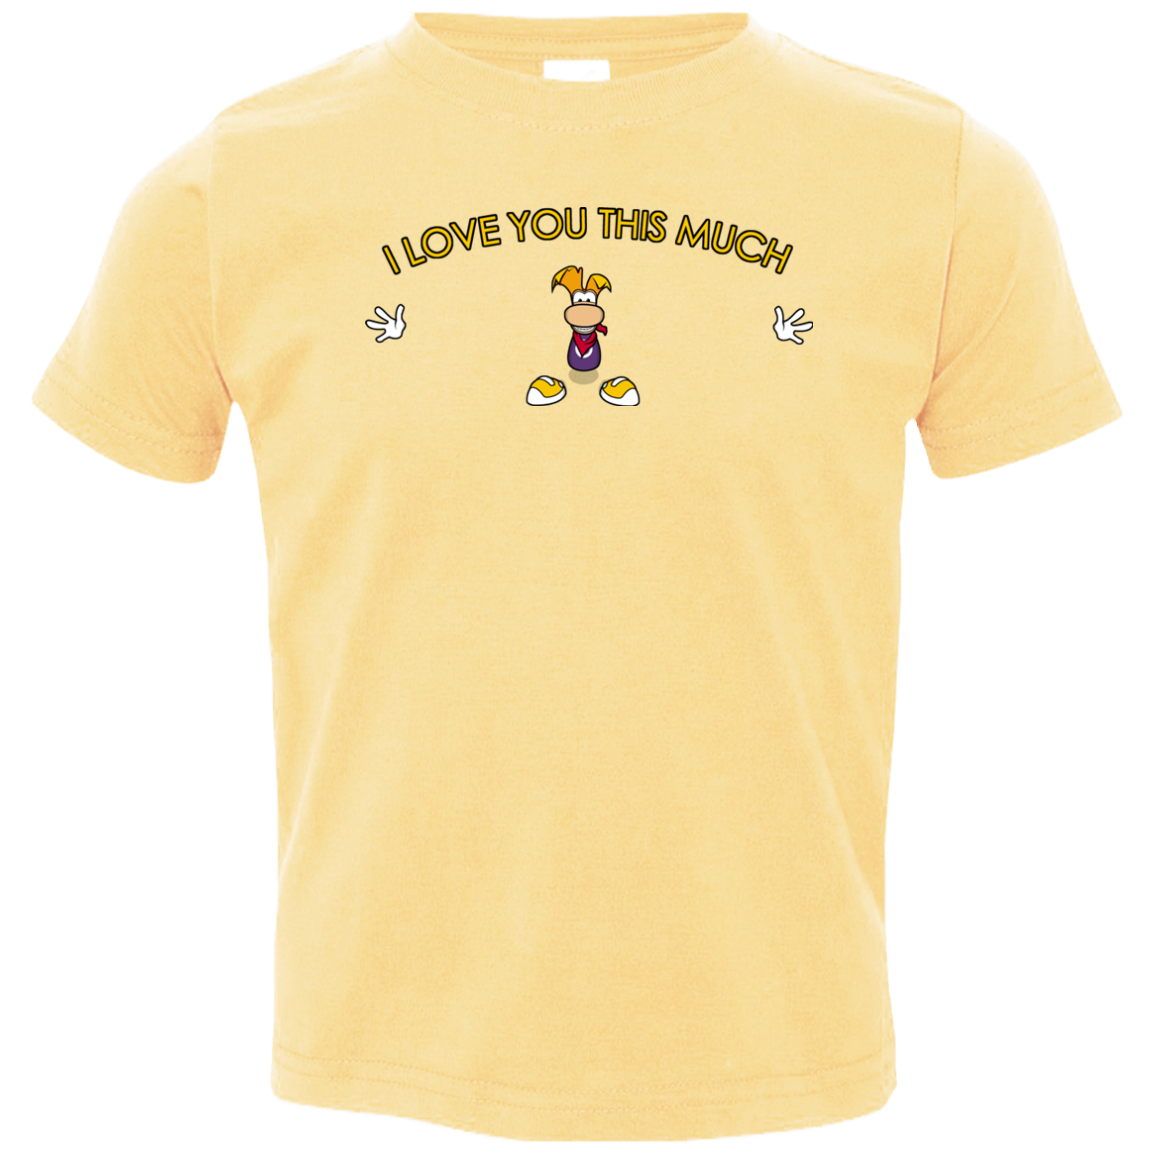 I Love You This Much Toddler Premium T-Shirt